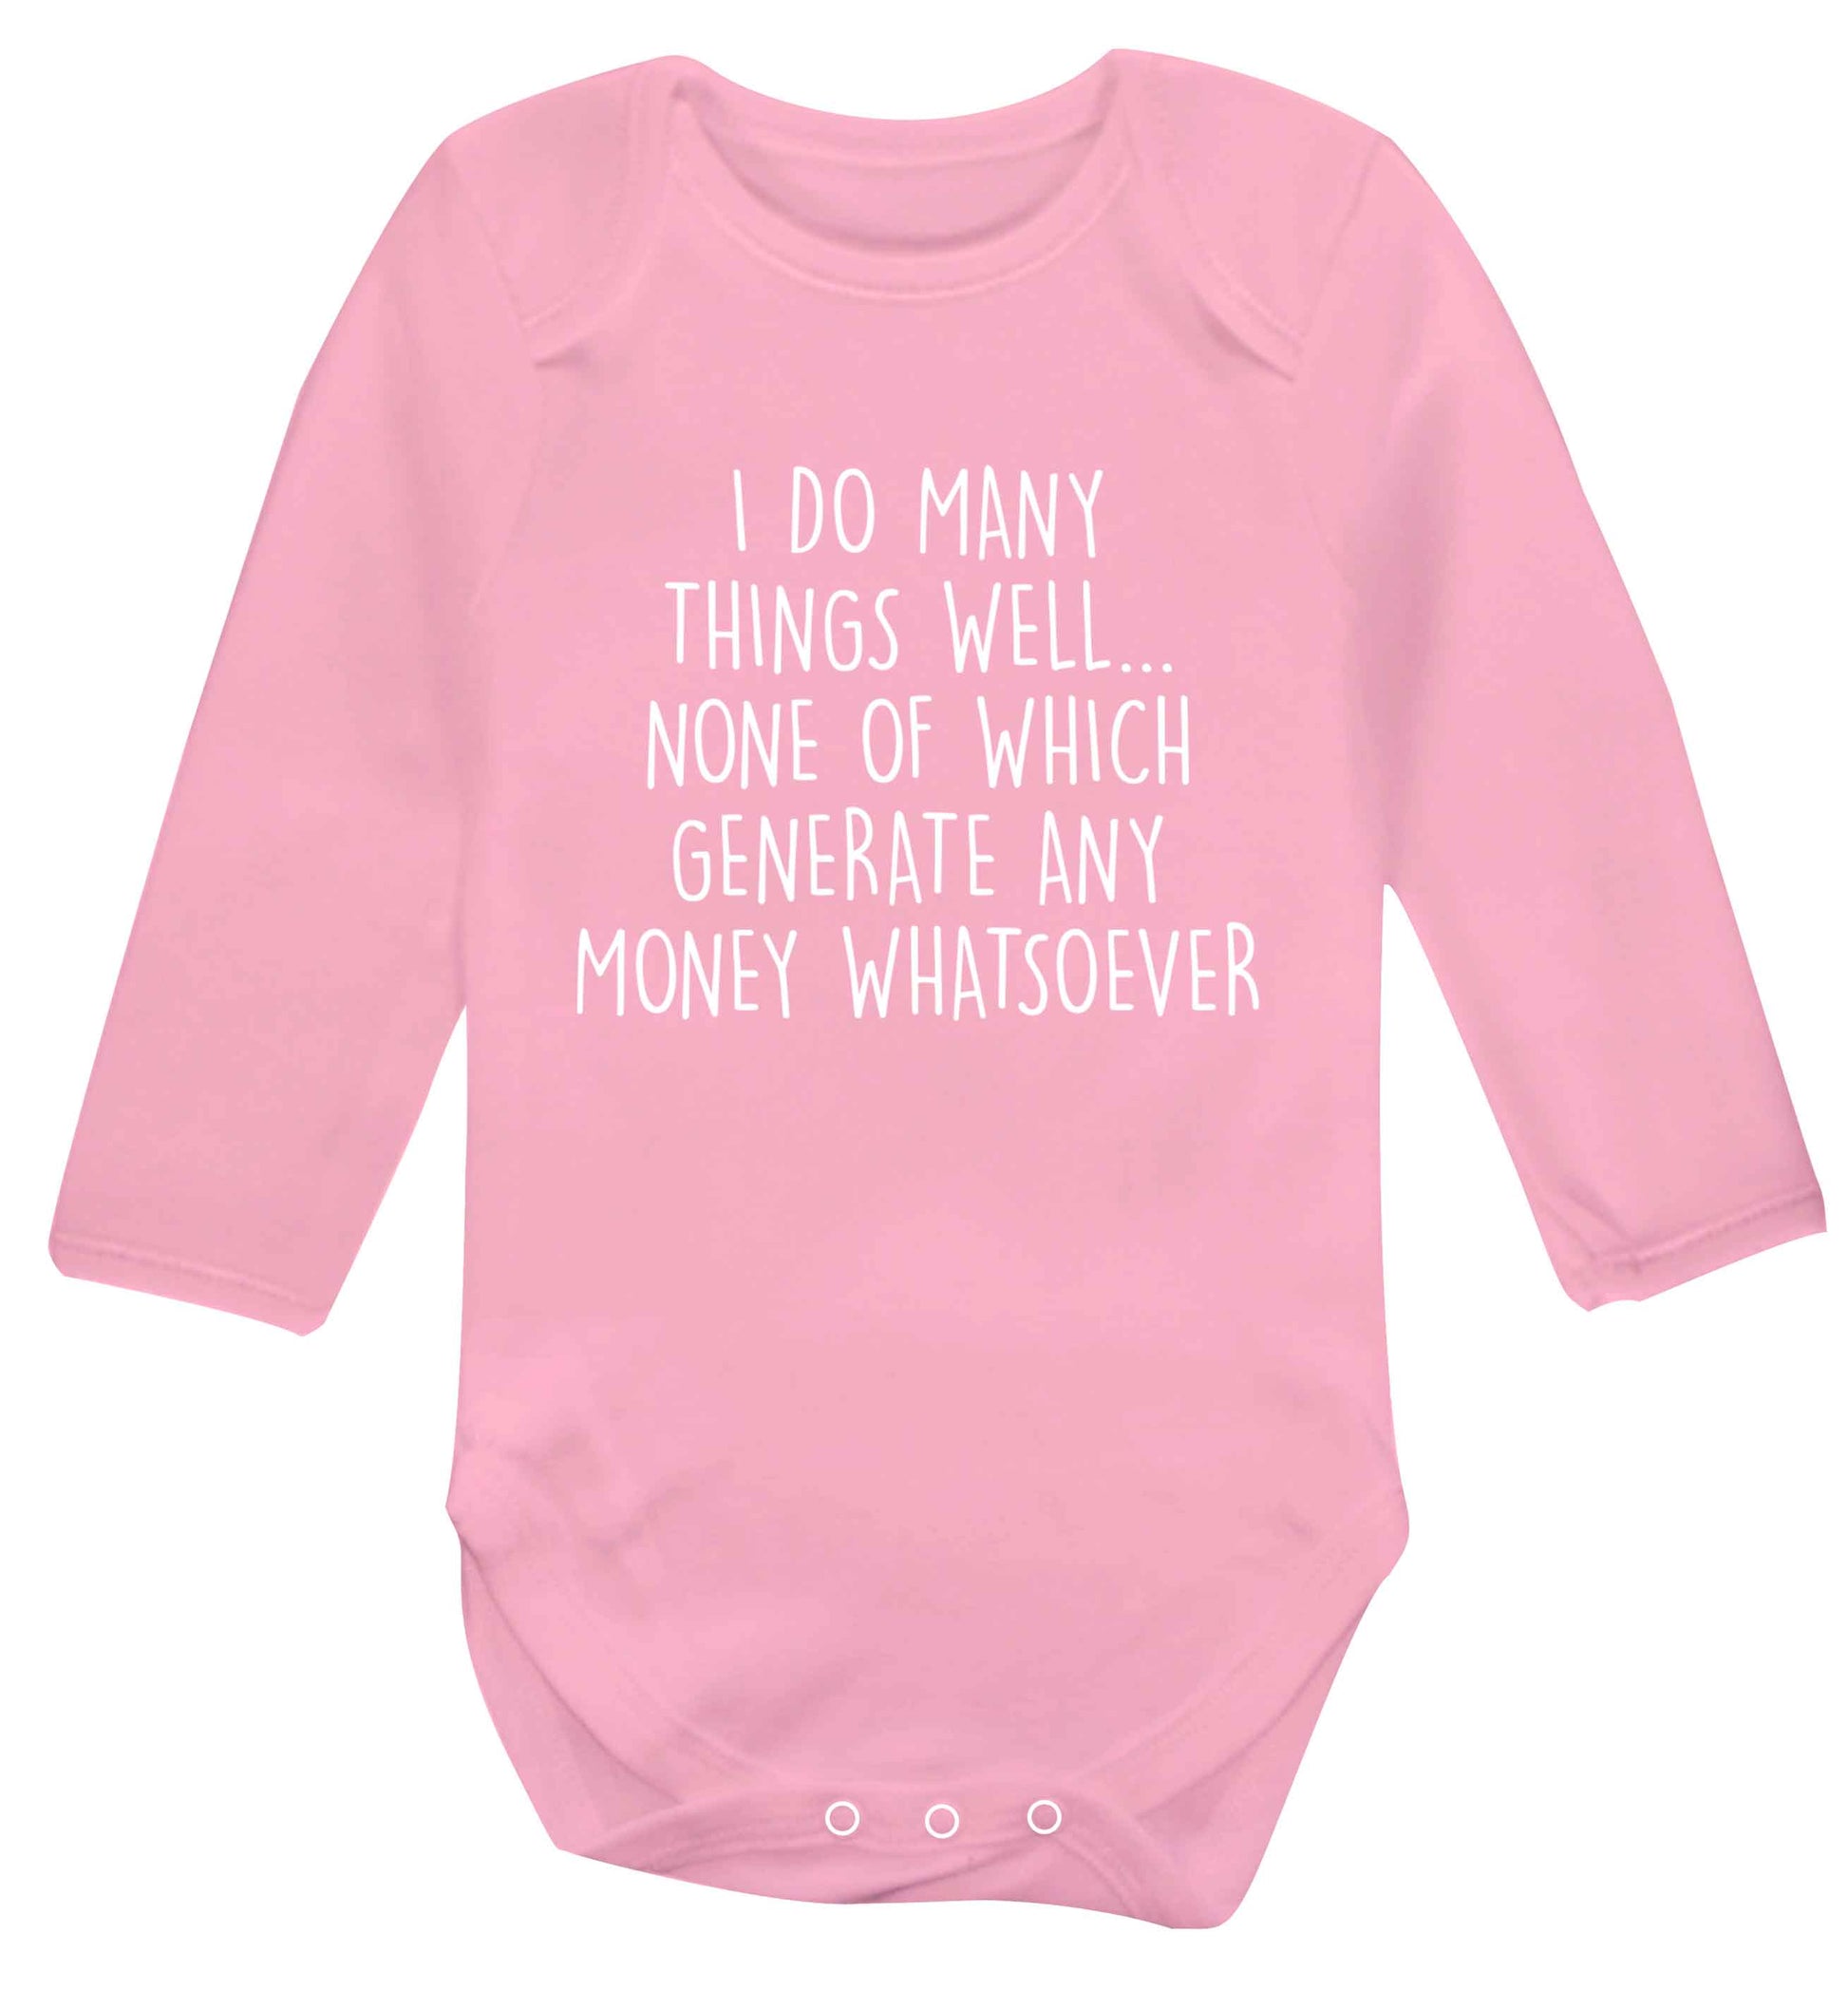 I do many things well none of which generate income Baby Vest long sleeved pale pink 6-12 months